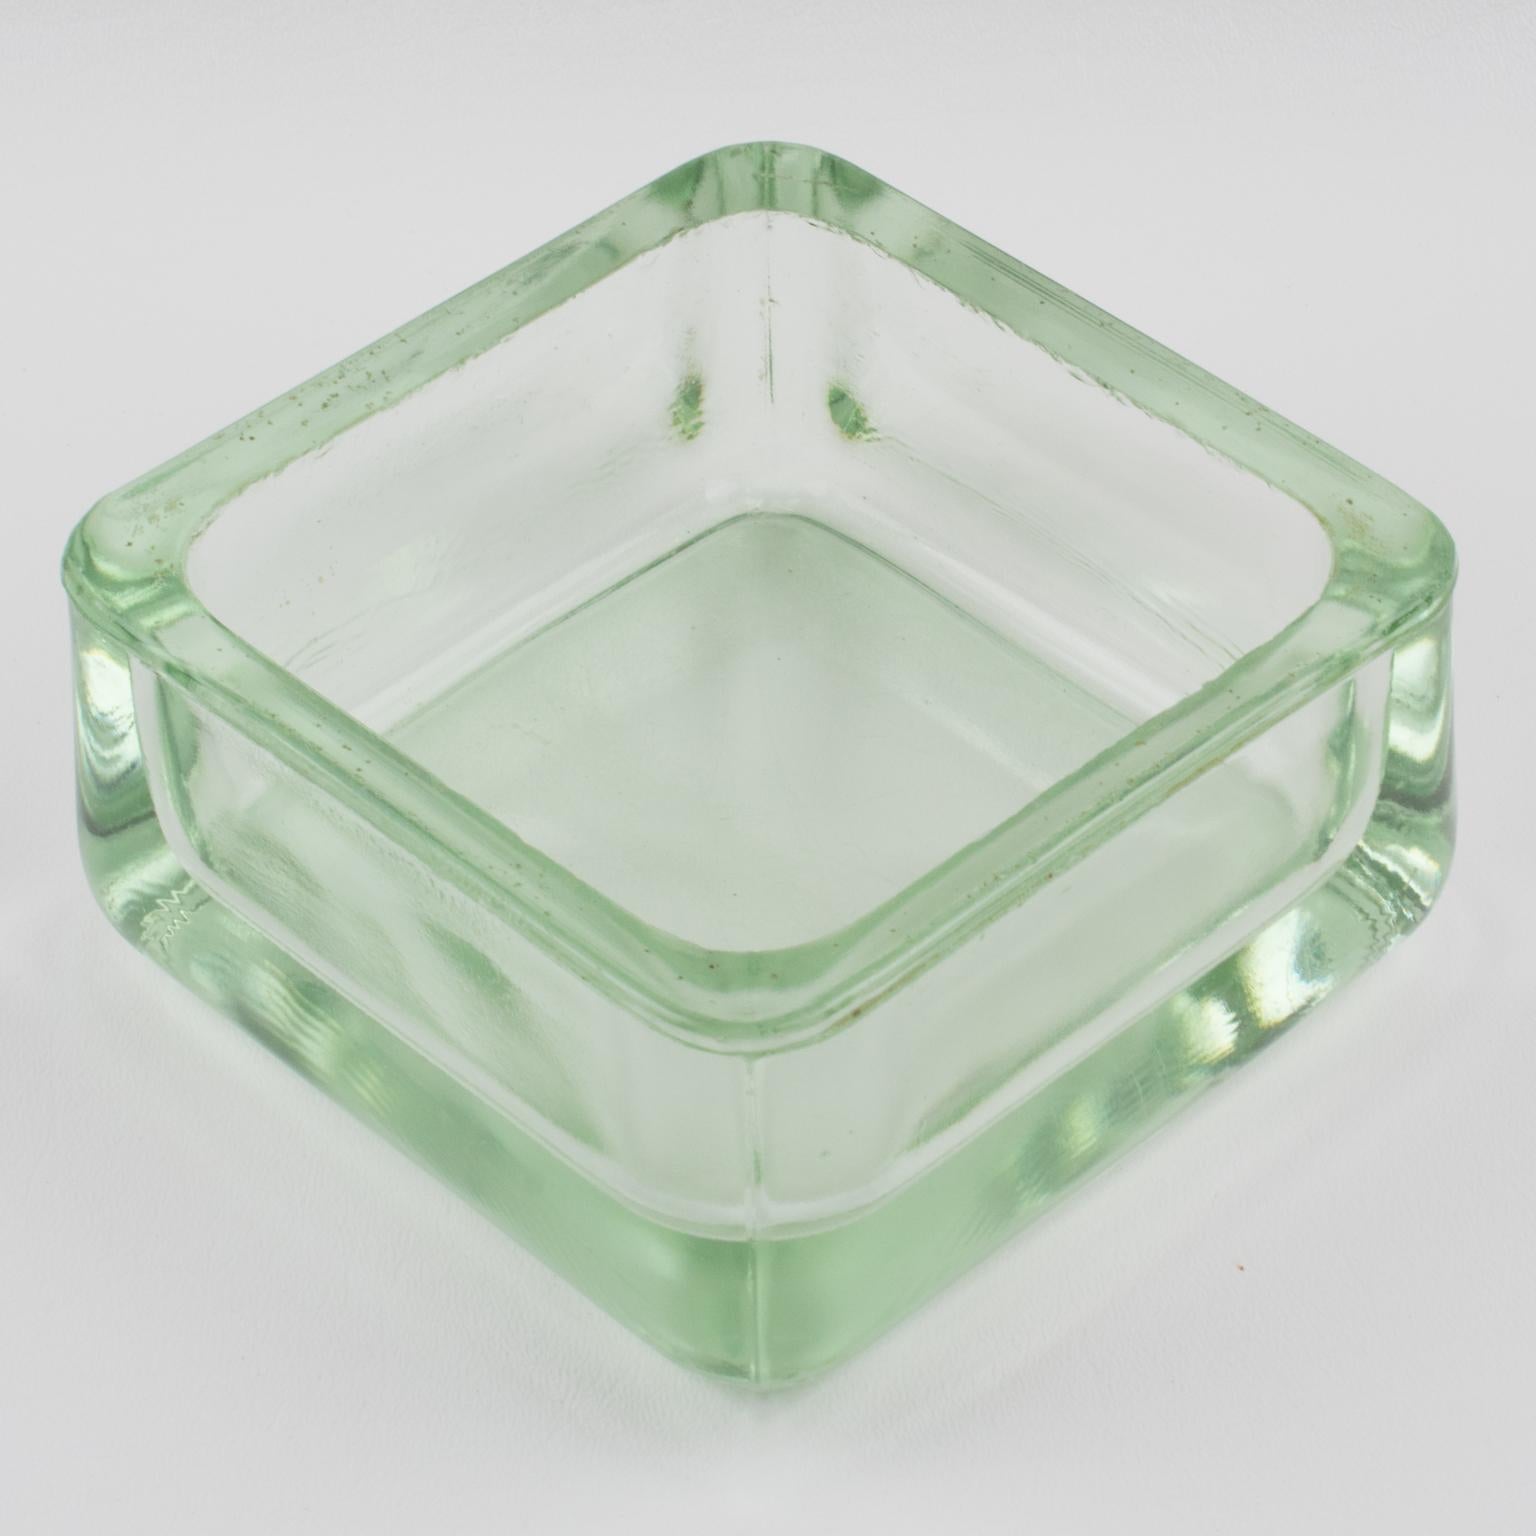 French Designed by Le Corbusier for Lumax Molded Glass Desk Accessory Ashtray Catchall